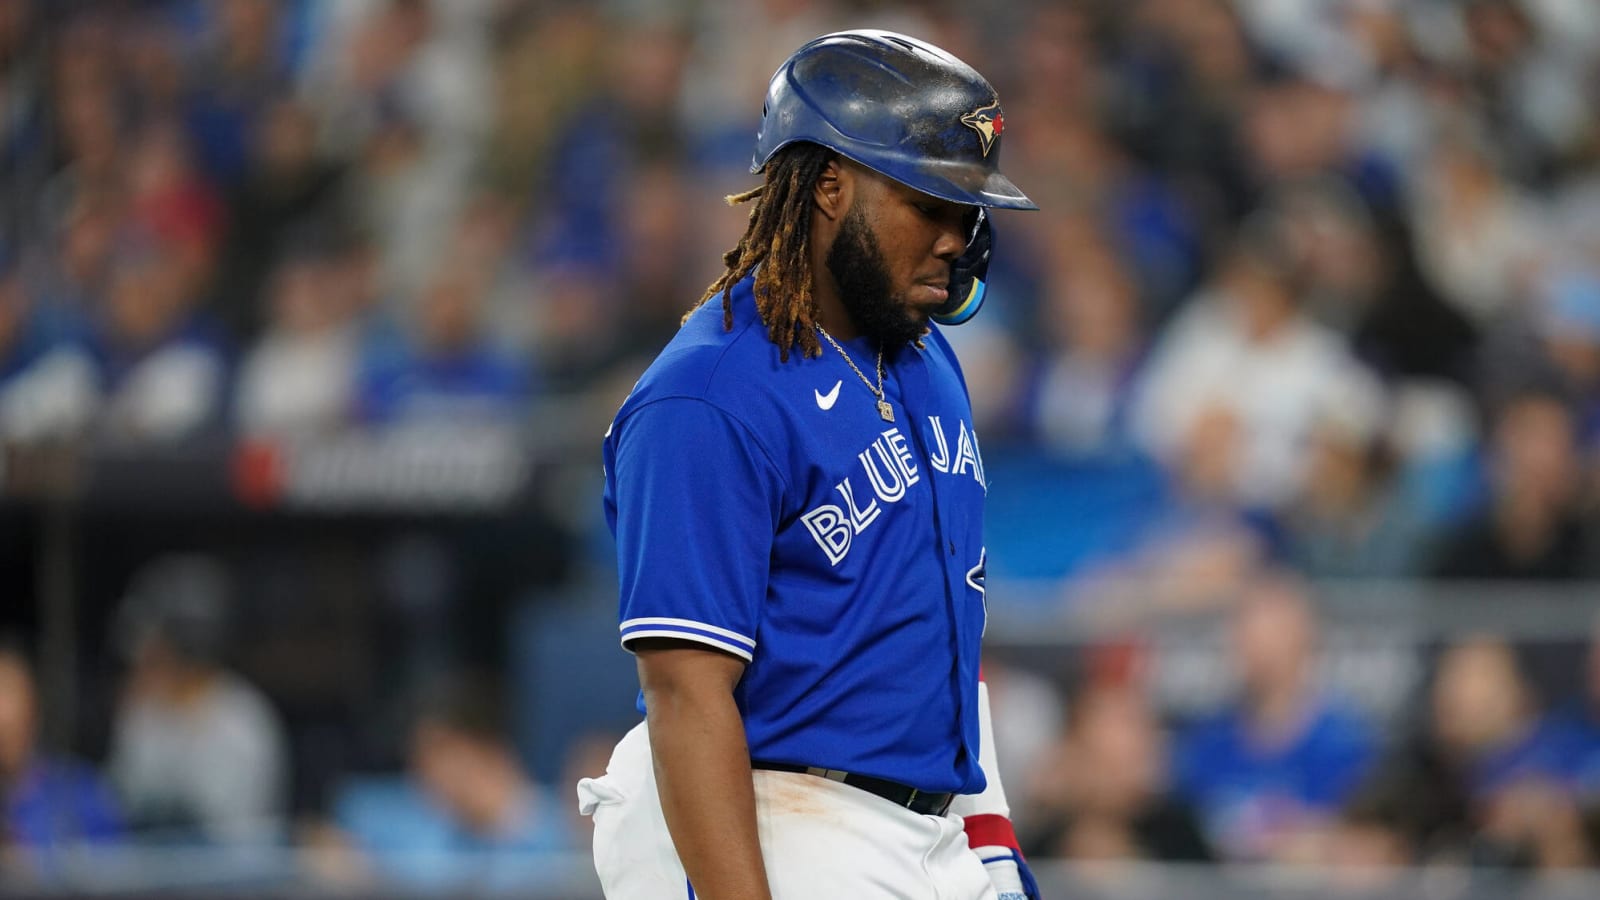 Would Blue Jays' Vladimir Guerrero Jr. ever sign with the Yankees?